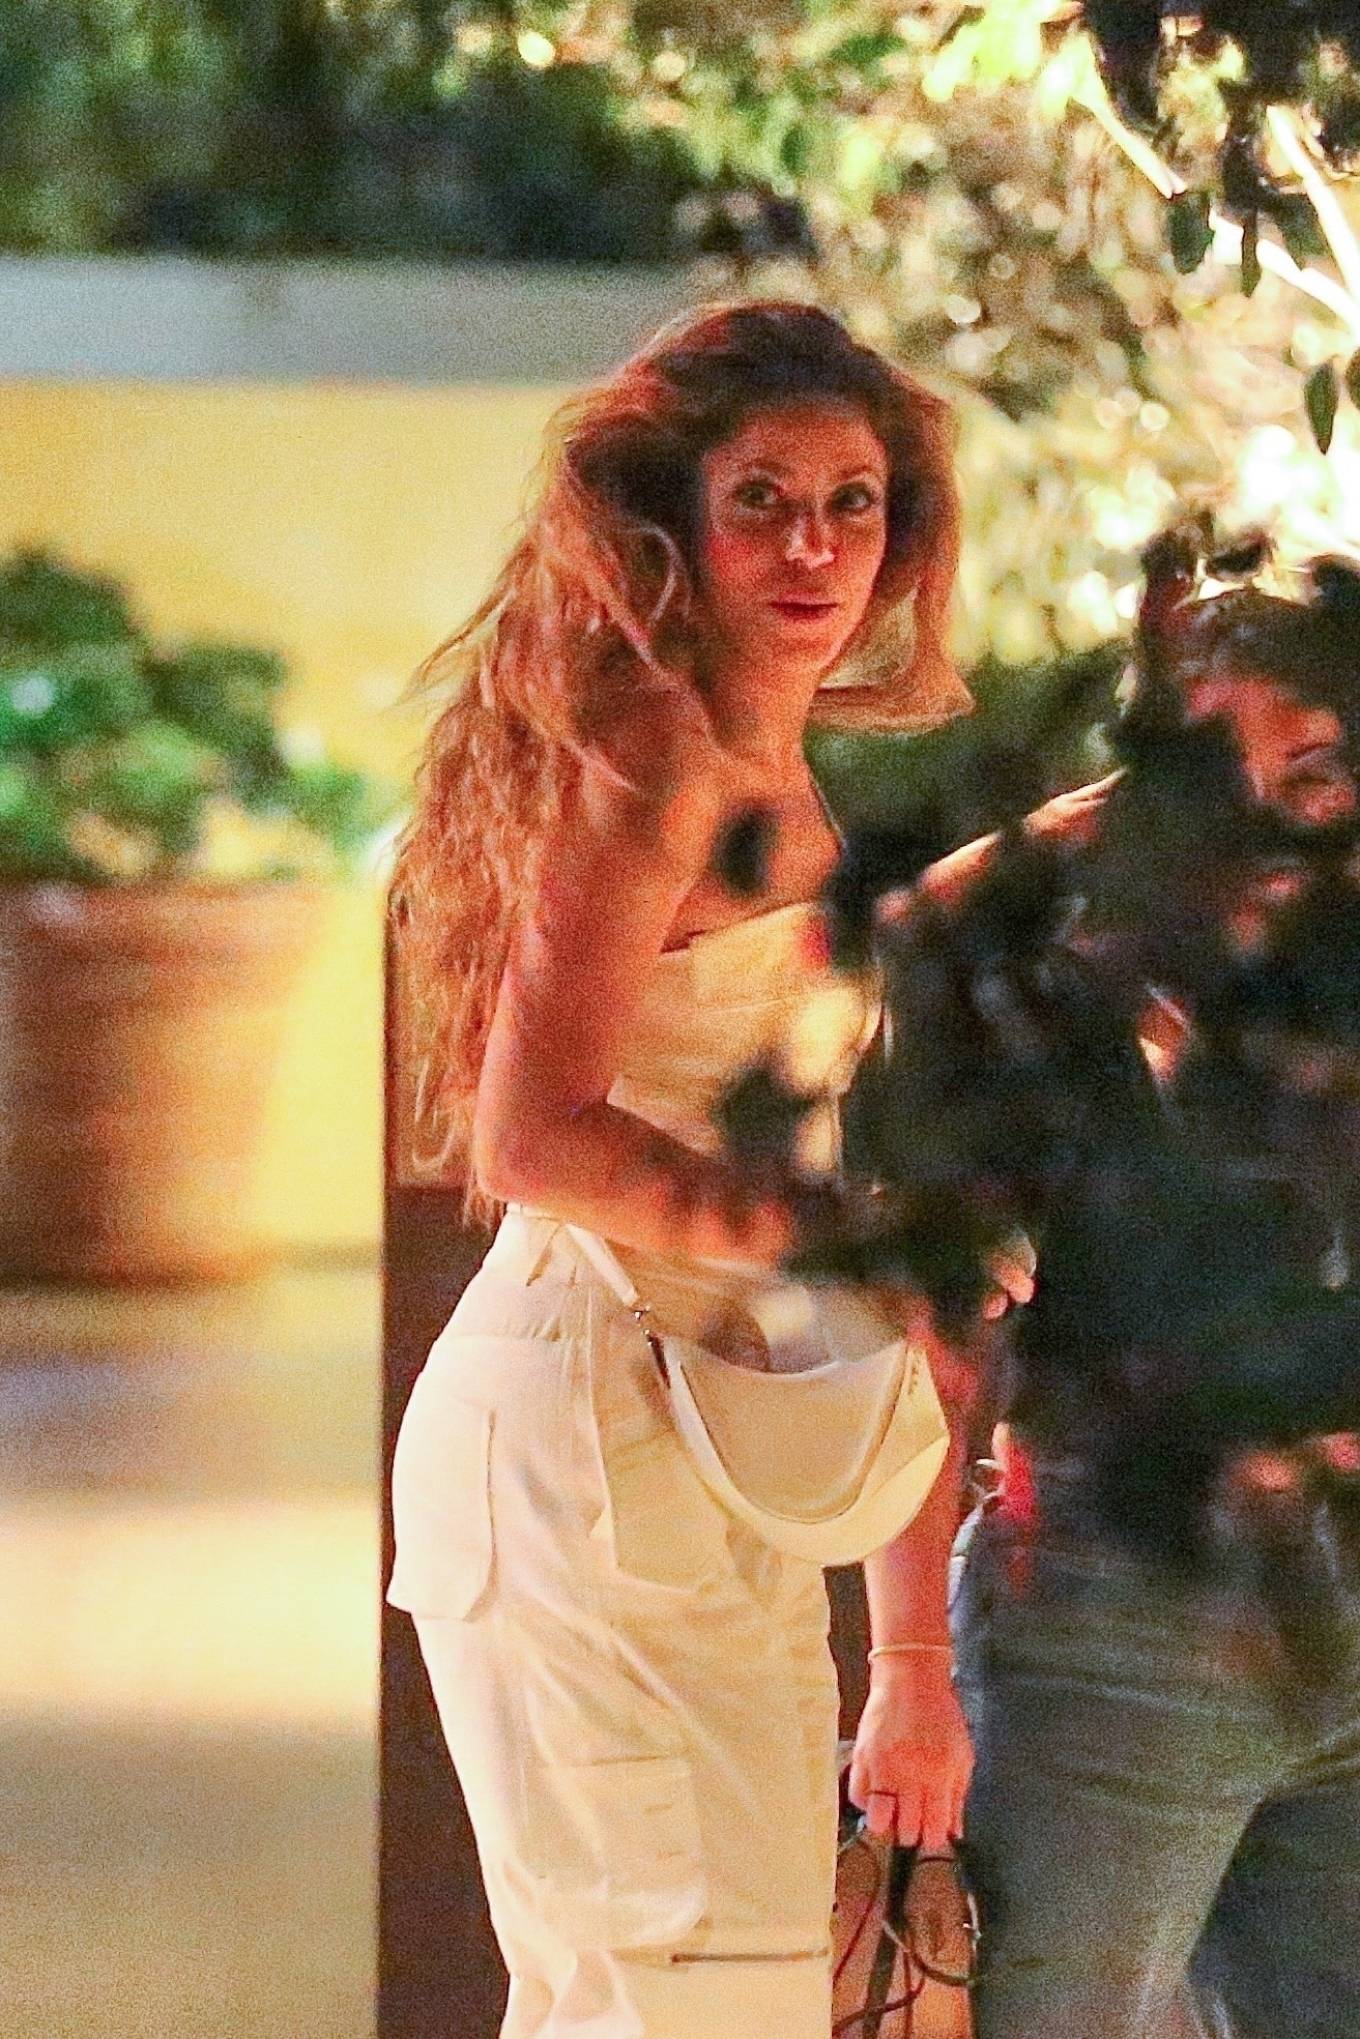 Shakira - Seen partying at Hotspot Delilah in West Hollywood